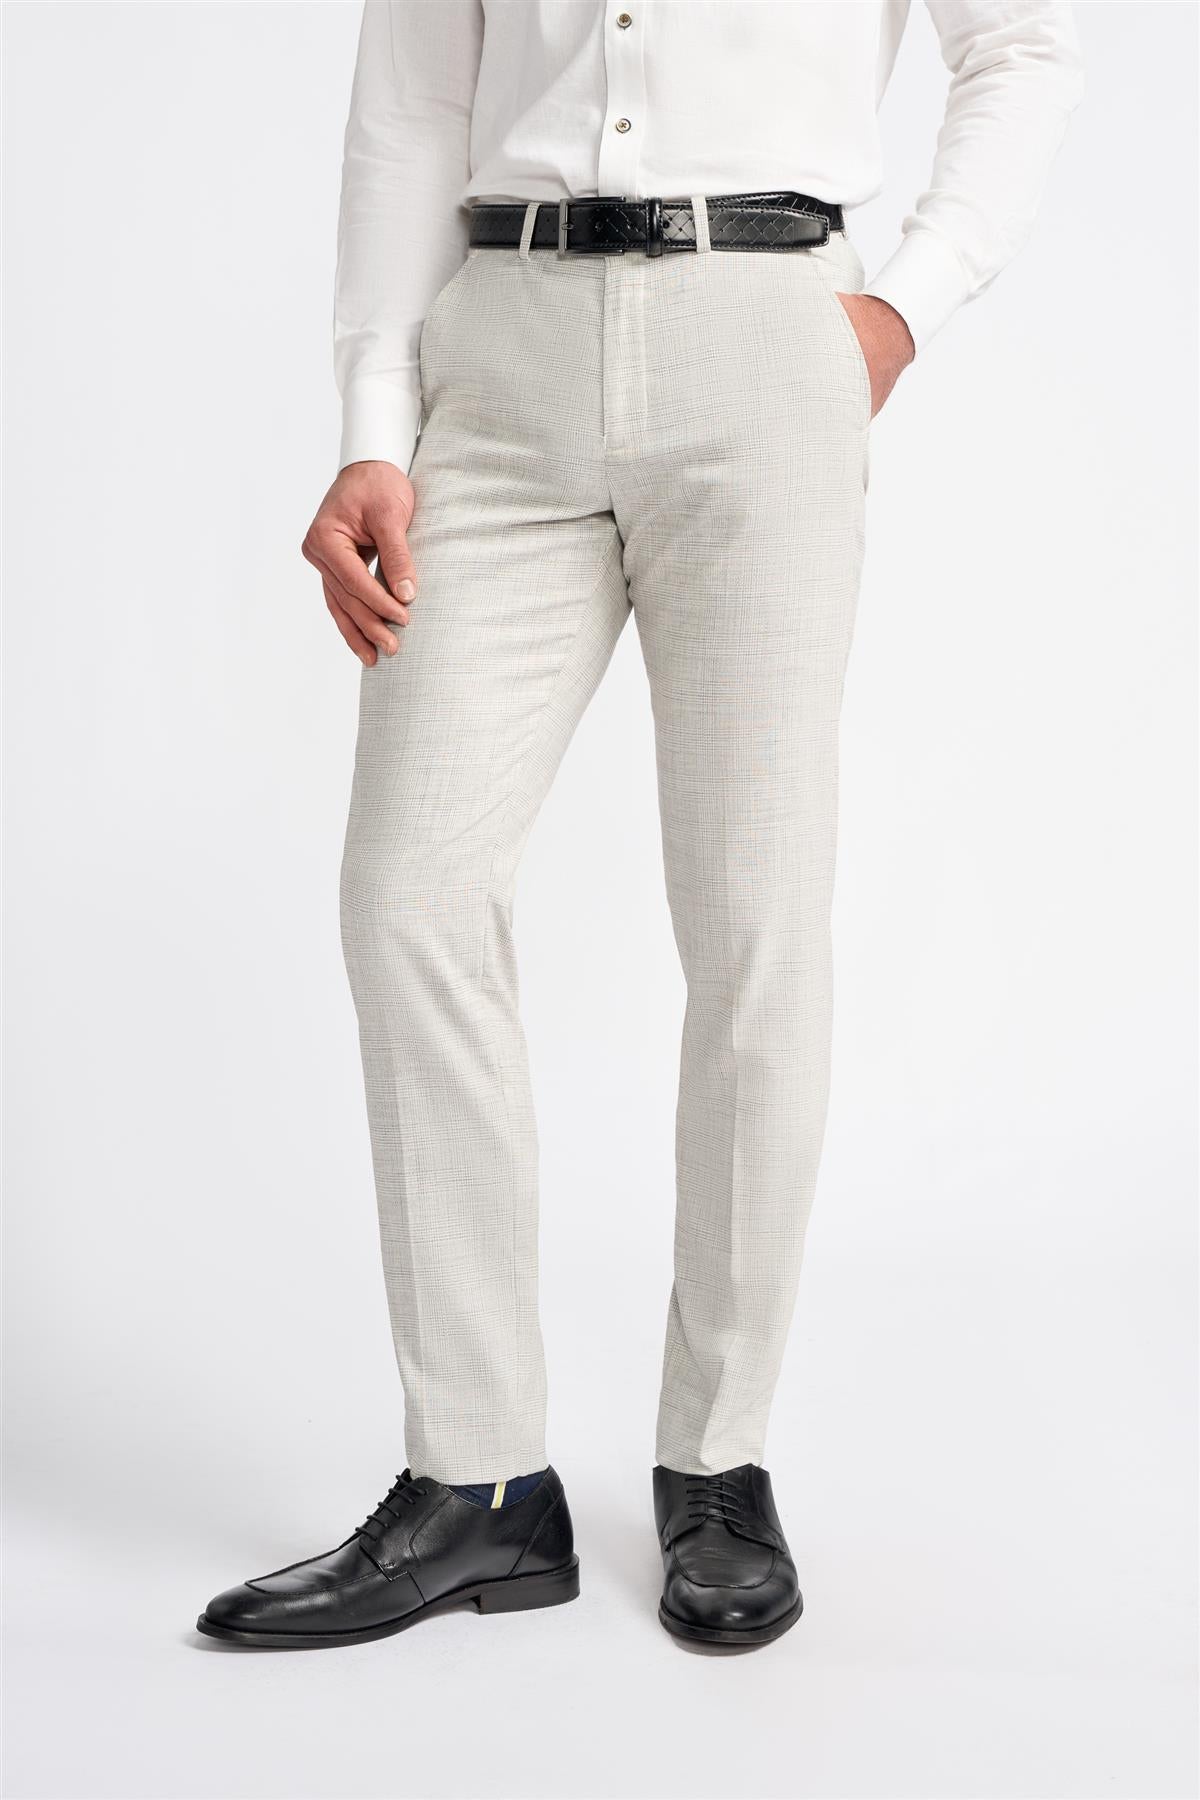 Ripley Trousers Front